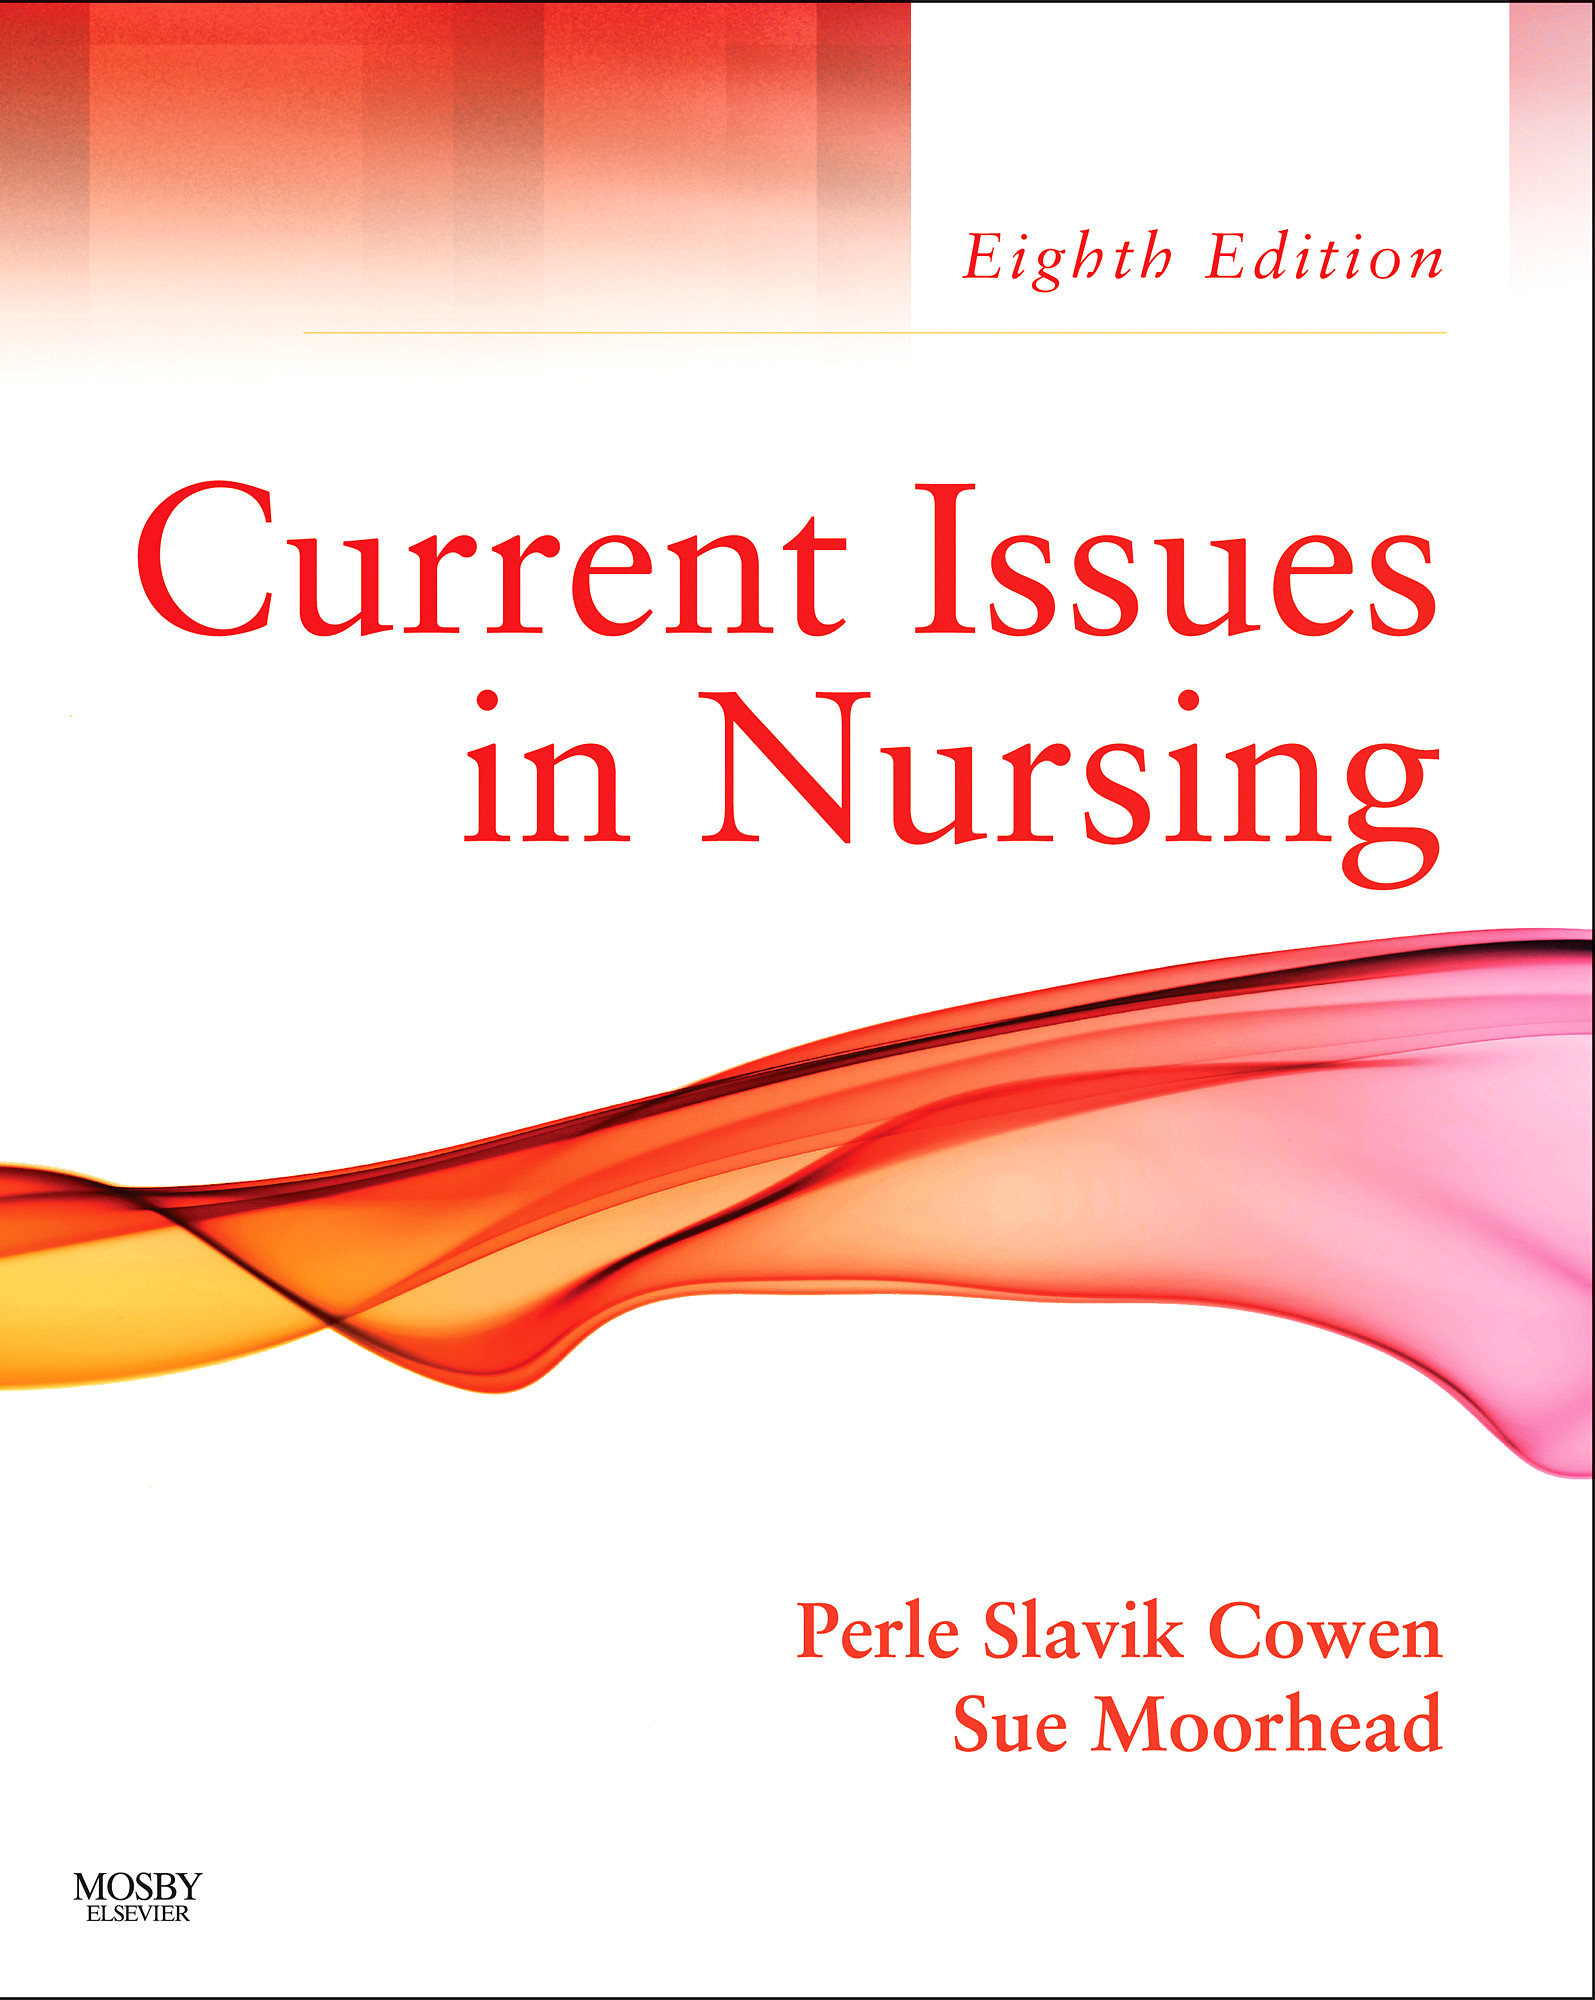 Current Issues In Nursing EBook frohberg